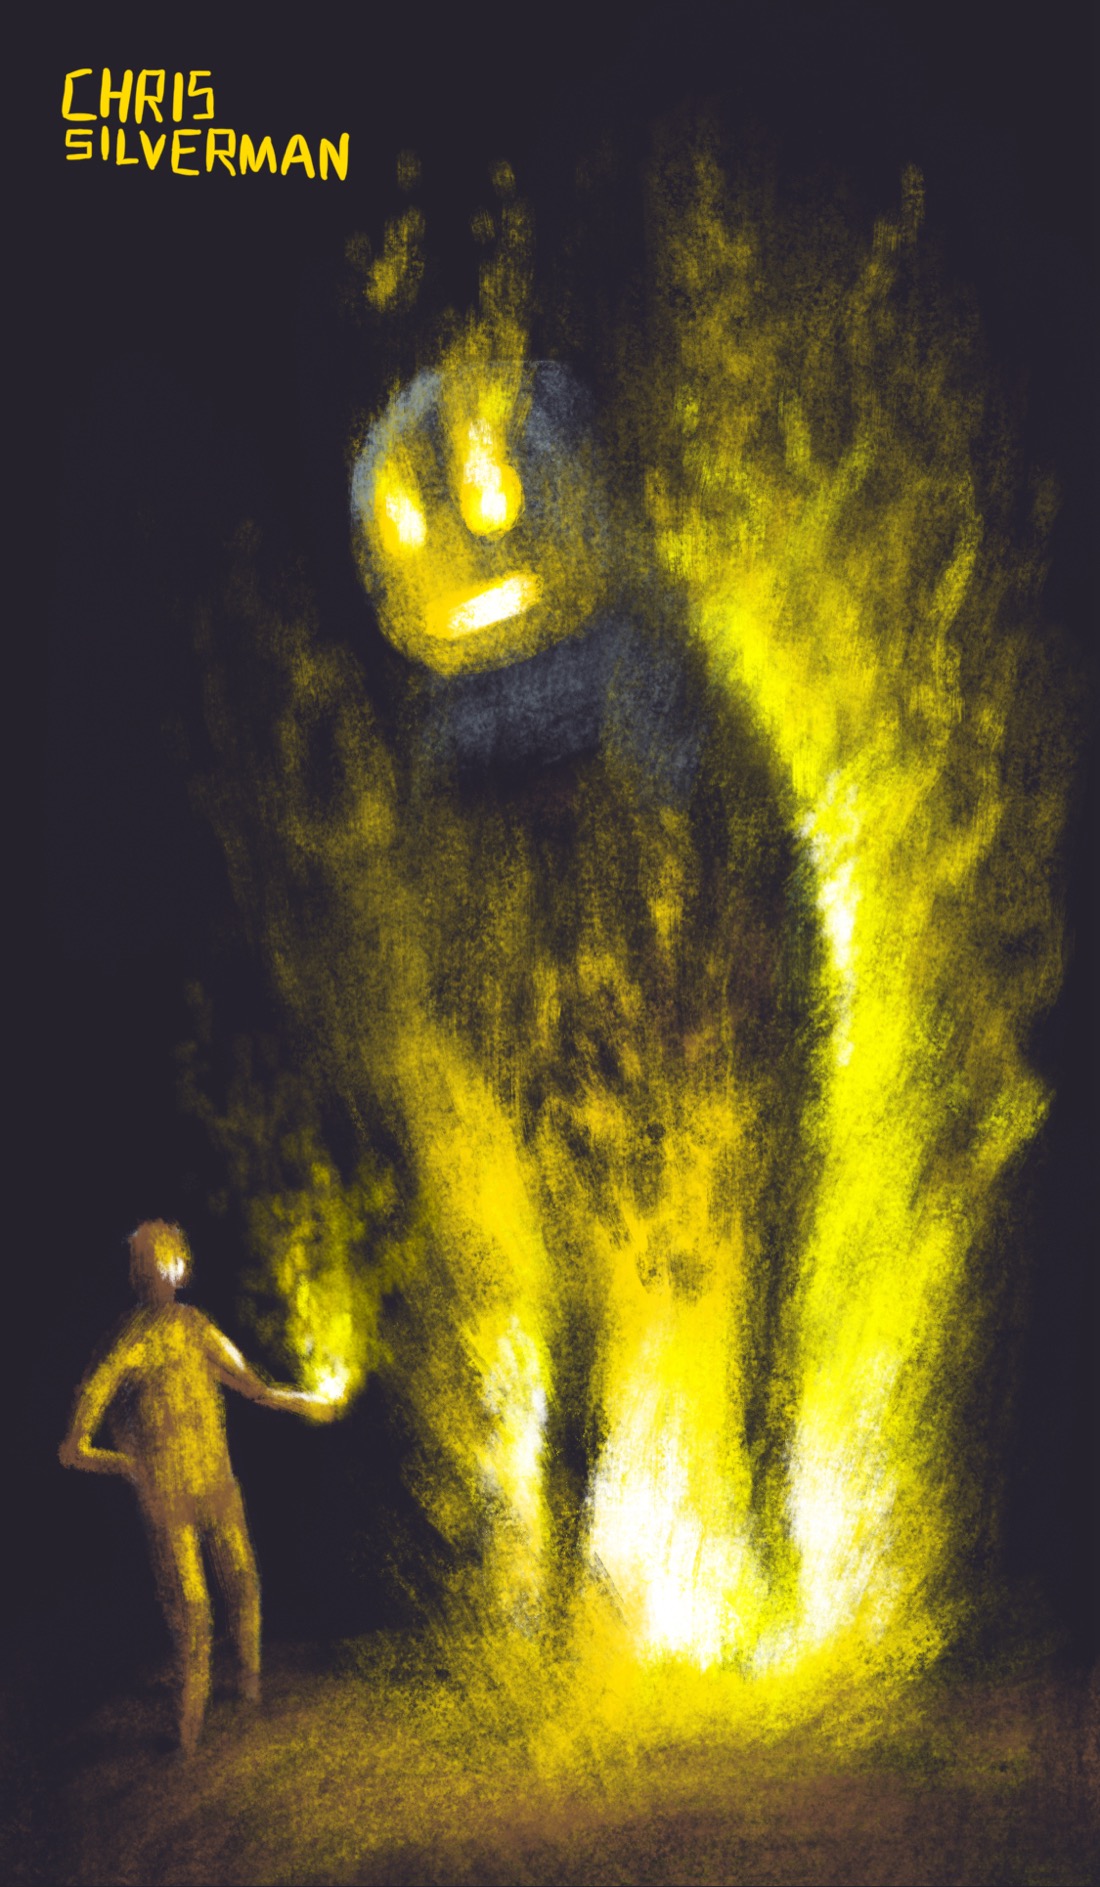 A roaring bonfire in which stands a giant figure, the flames rising around it. Flames come out of its eyes and mouth. Next to the bonfire stands a much smaller figure, holding out its left hand, from which is erupting a small fire. The drawing is primarily yellow, white, and brown, on a black background.